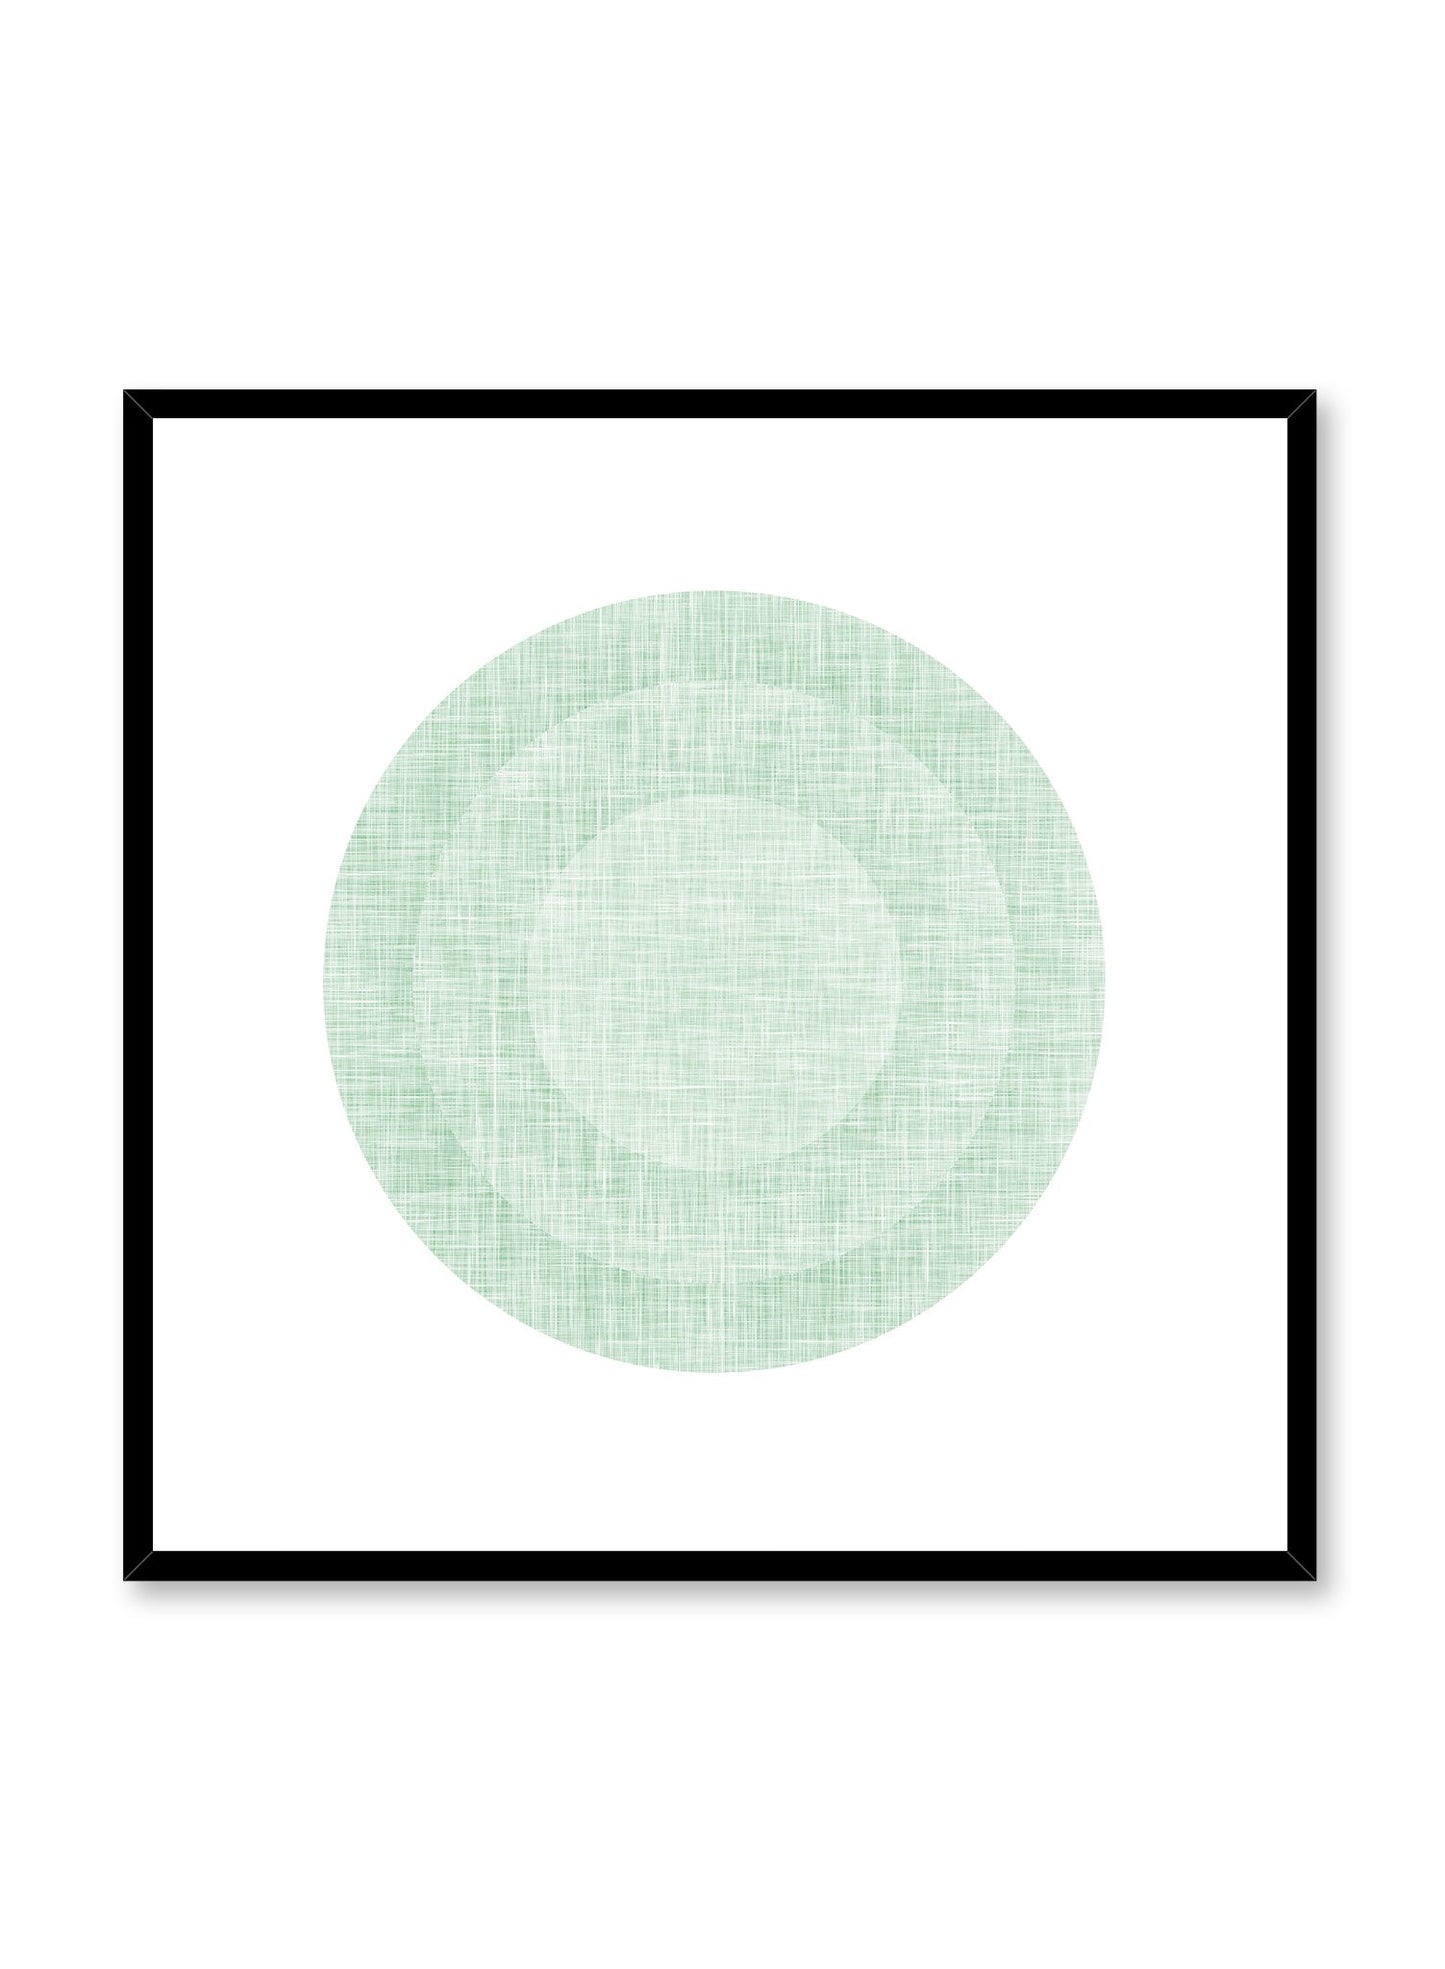 Minimalist design poster by Opposite Wall with abstract green circles in target shape